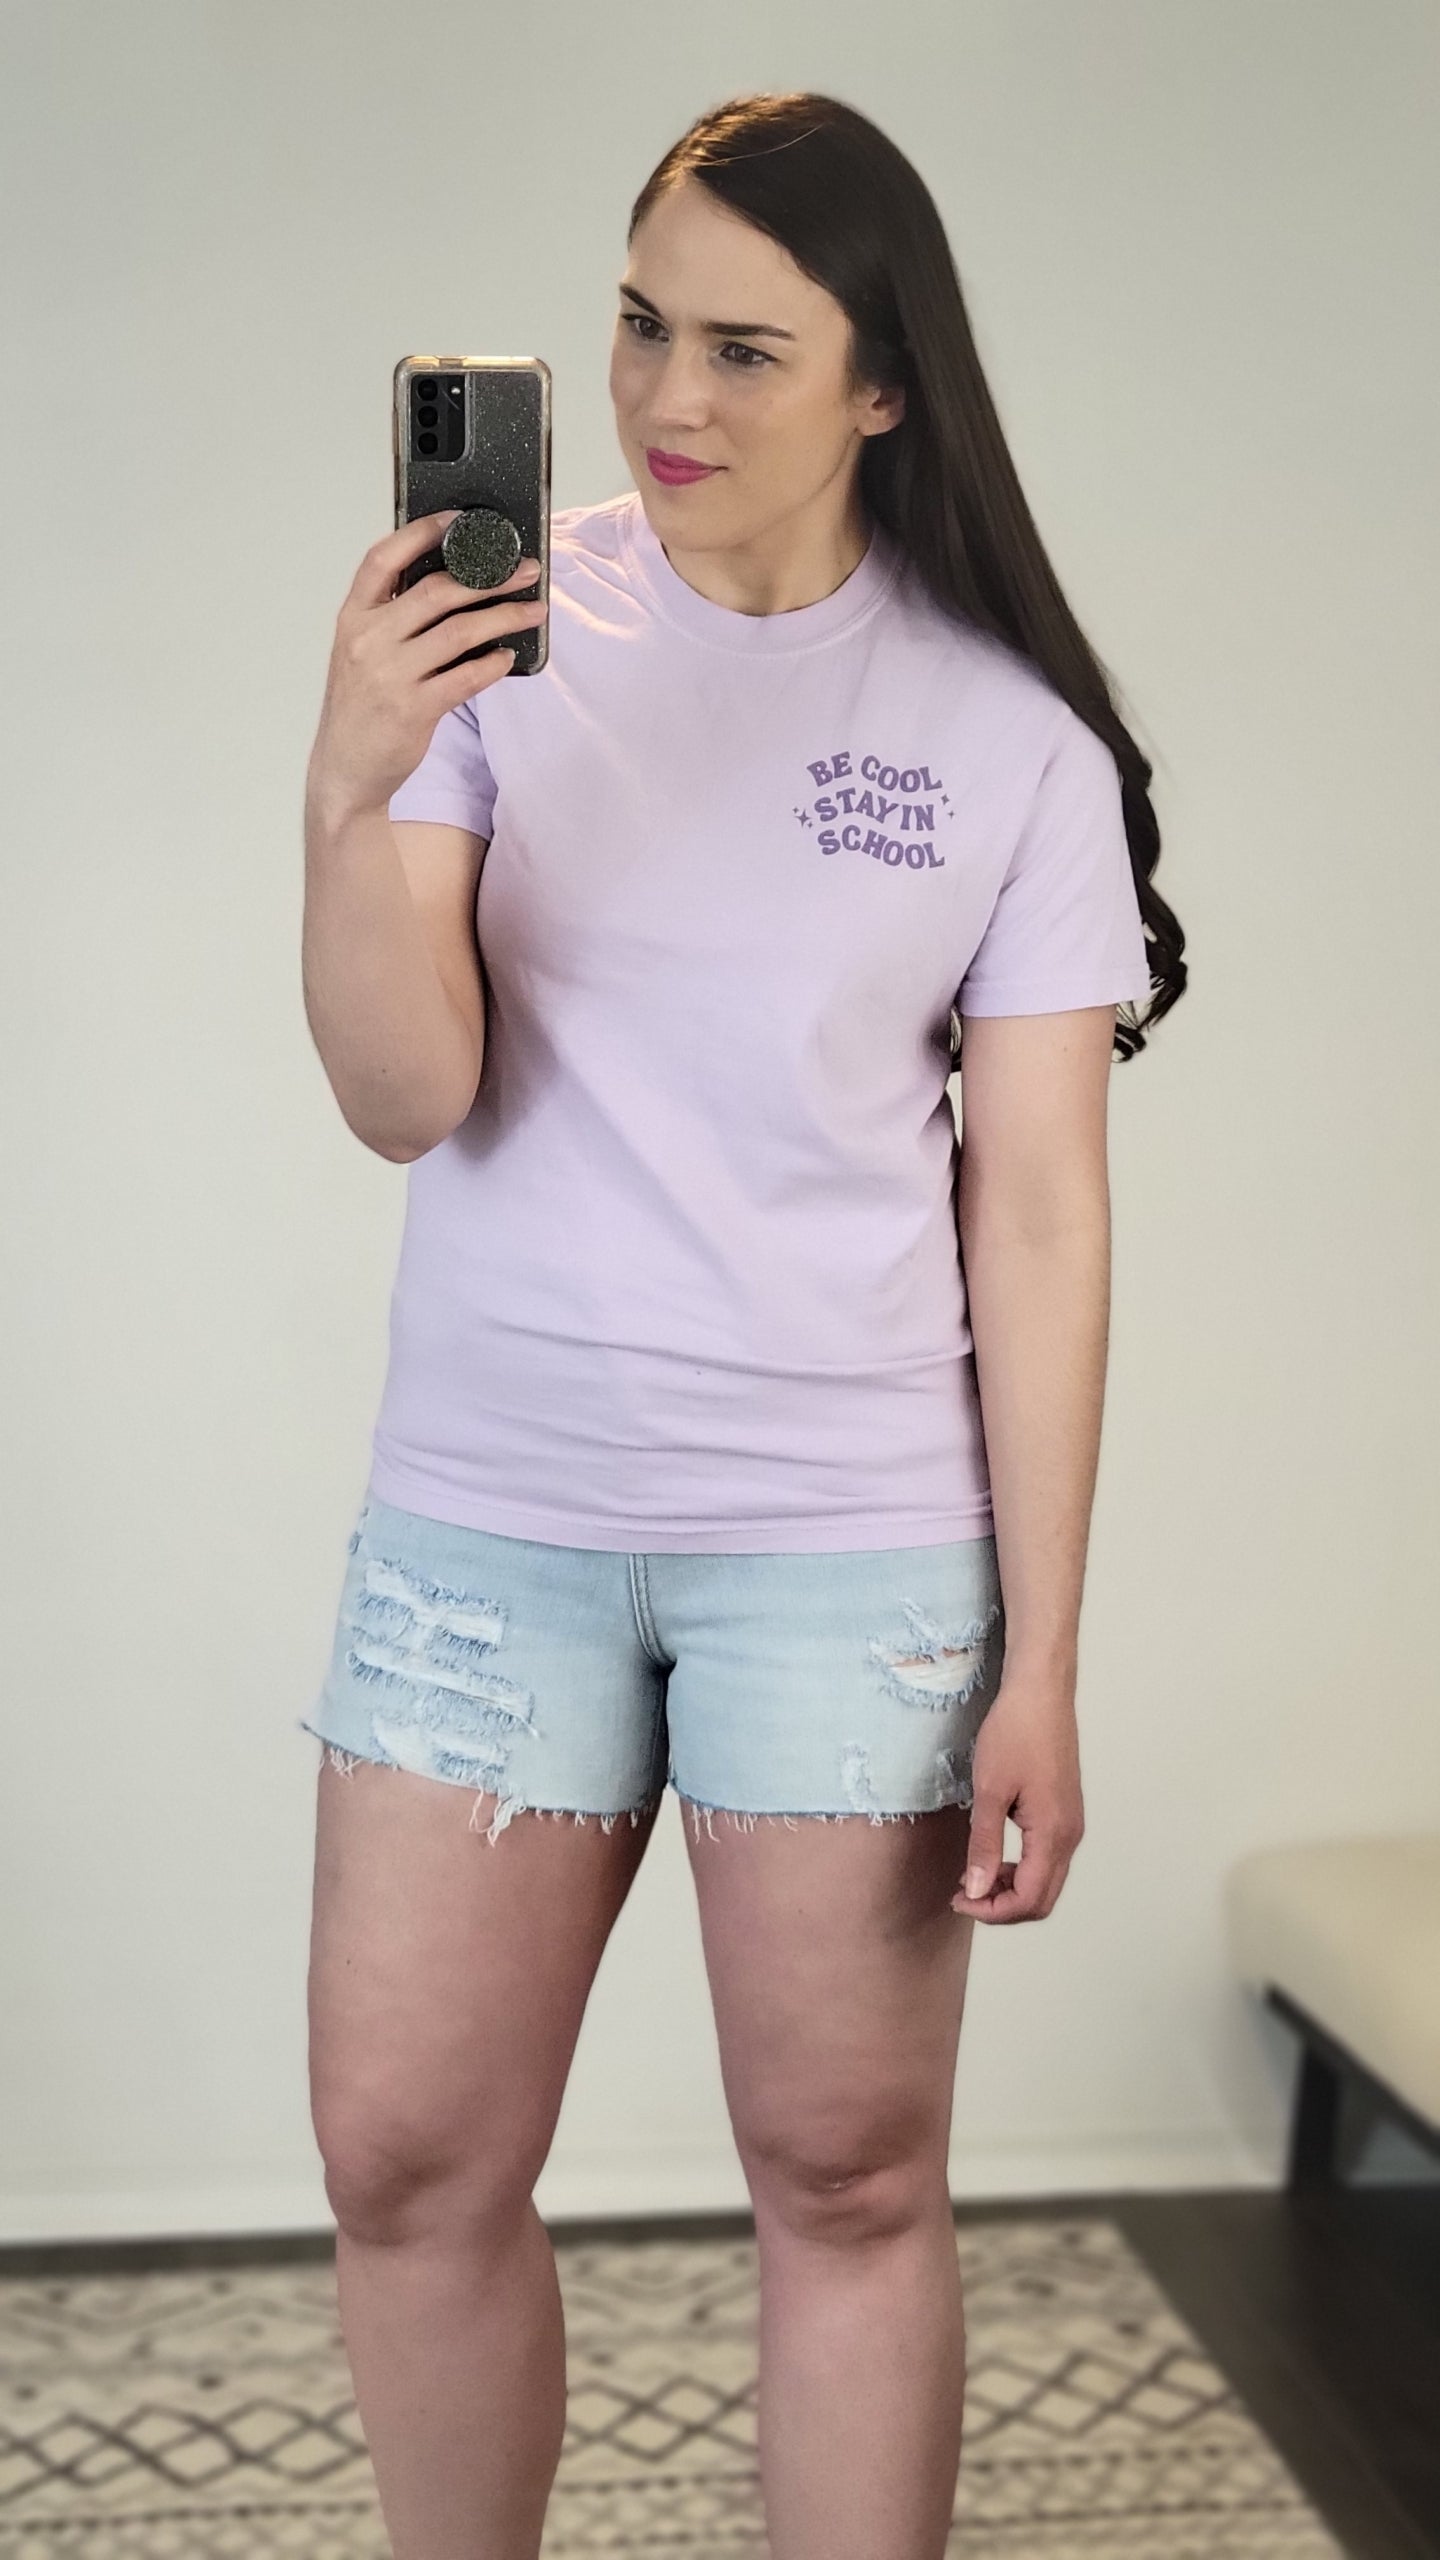  Lavender “Be Cool Stay in School” Teacher Graphic Tee "Melissa"